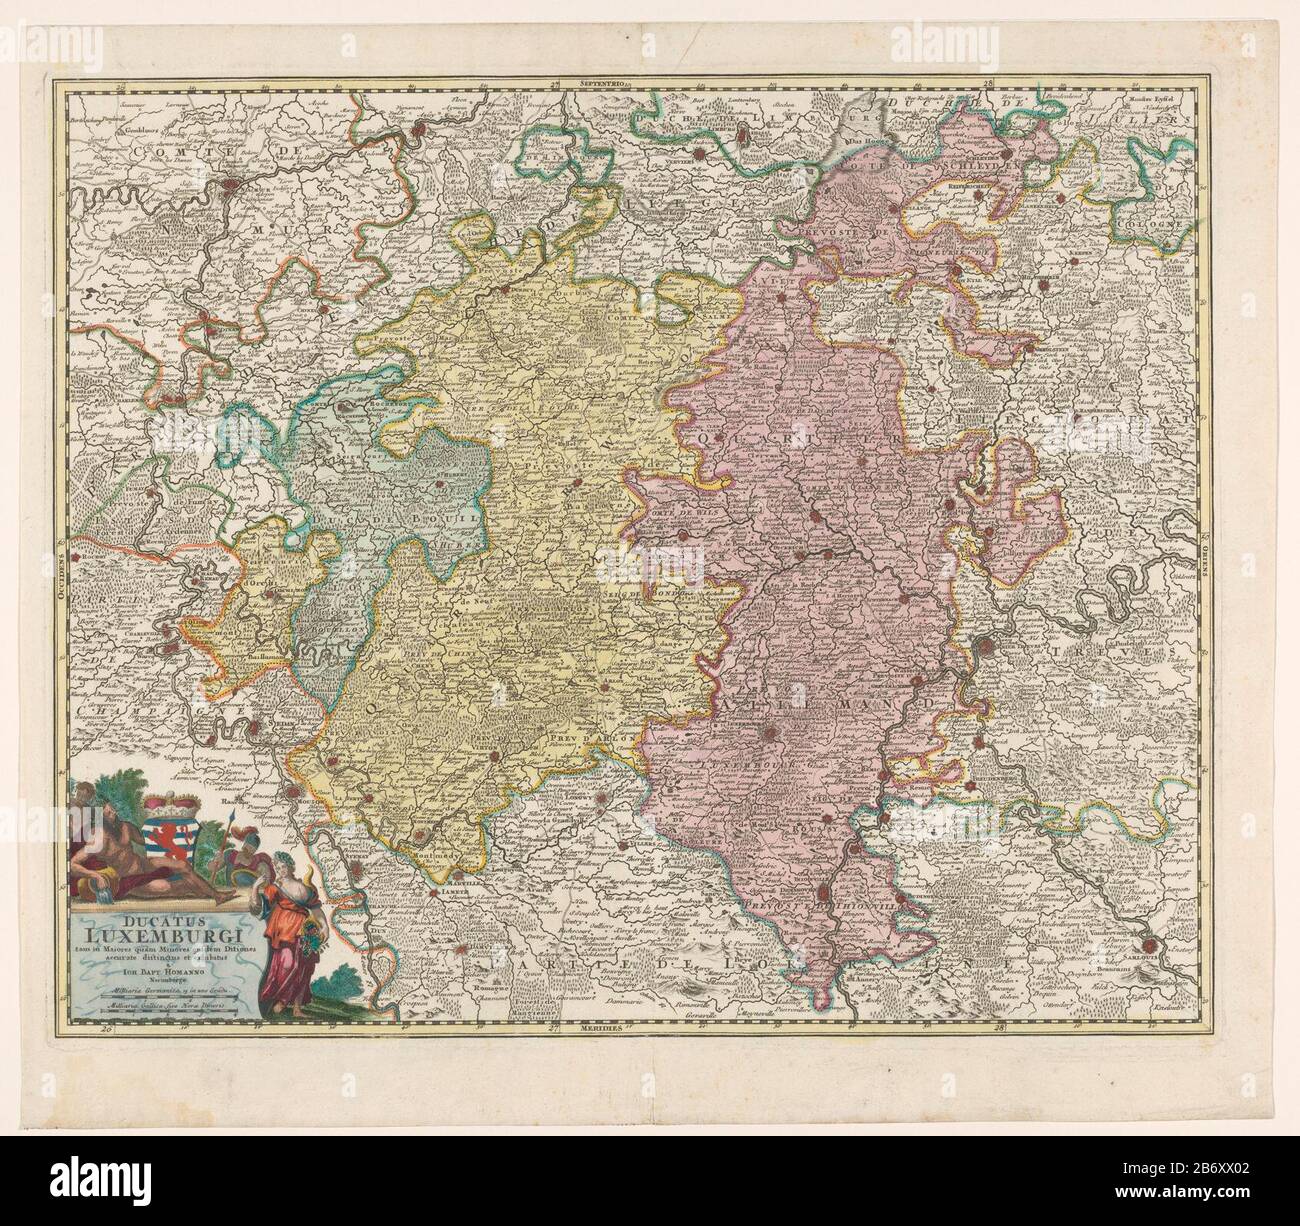 Kaart van het hertogdom Luxemburg Ducatus Luxemburgi tam in maiores quam minores (titel op object) Map of the Duchy of Luxembourg. Left under the title cartouche above the arms of the Duchy of Luxembourg under two shell sticks: Milli Aria Germanica 15 in uno Graduation / Milli Aria Gallica sive Horae Itineris. The card is provided with a degree scale along the randen. Manufacturer : print maker: anonymous publisher: Johann Baptista Homann (indicated on object) Place manufacture: Nürnberg Date: 1674 - 1724 Physical characteristics: etching and engra, hand-colored material: paper Technique: etch Stock Photo